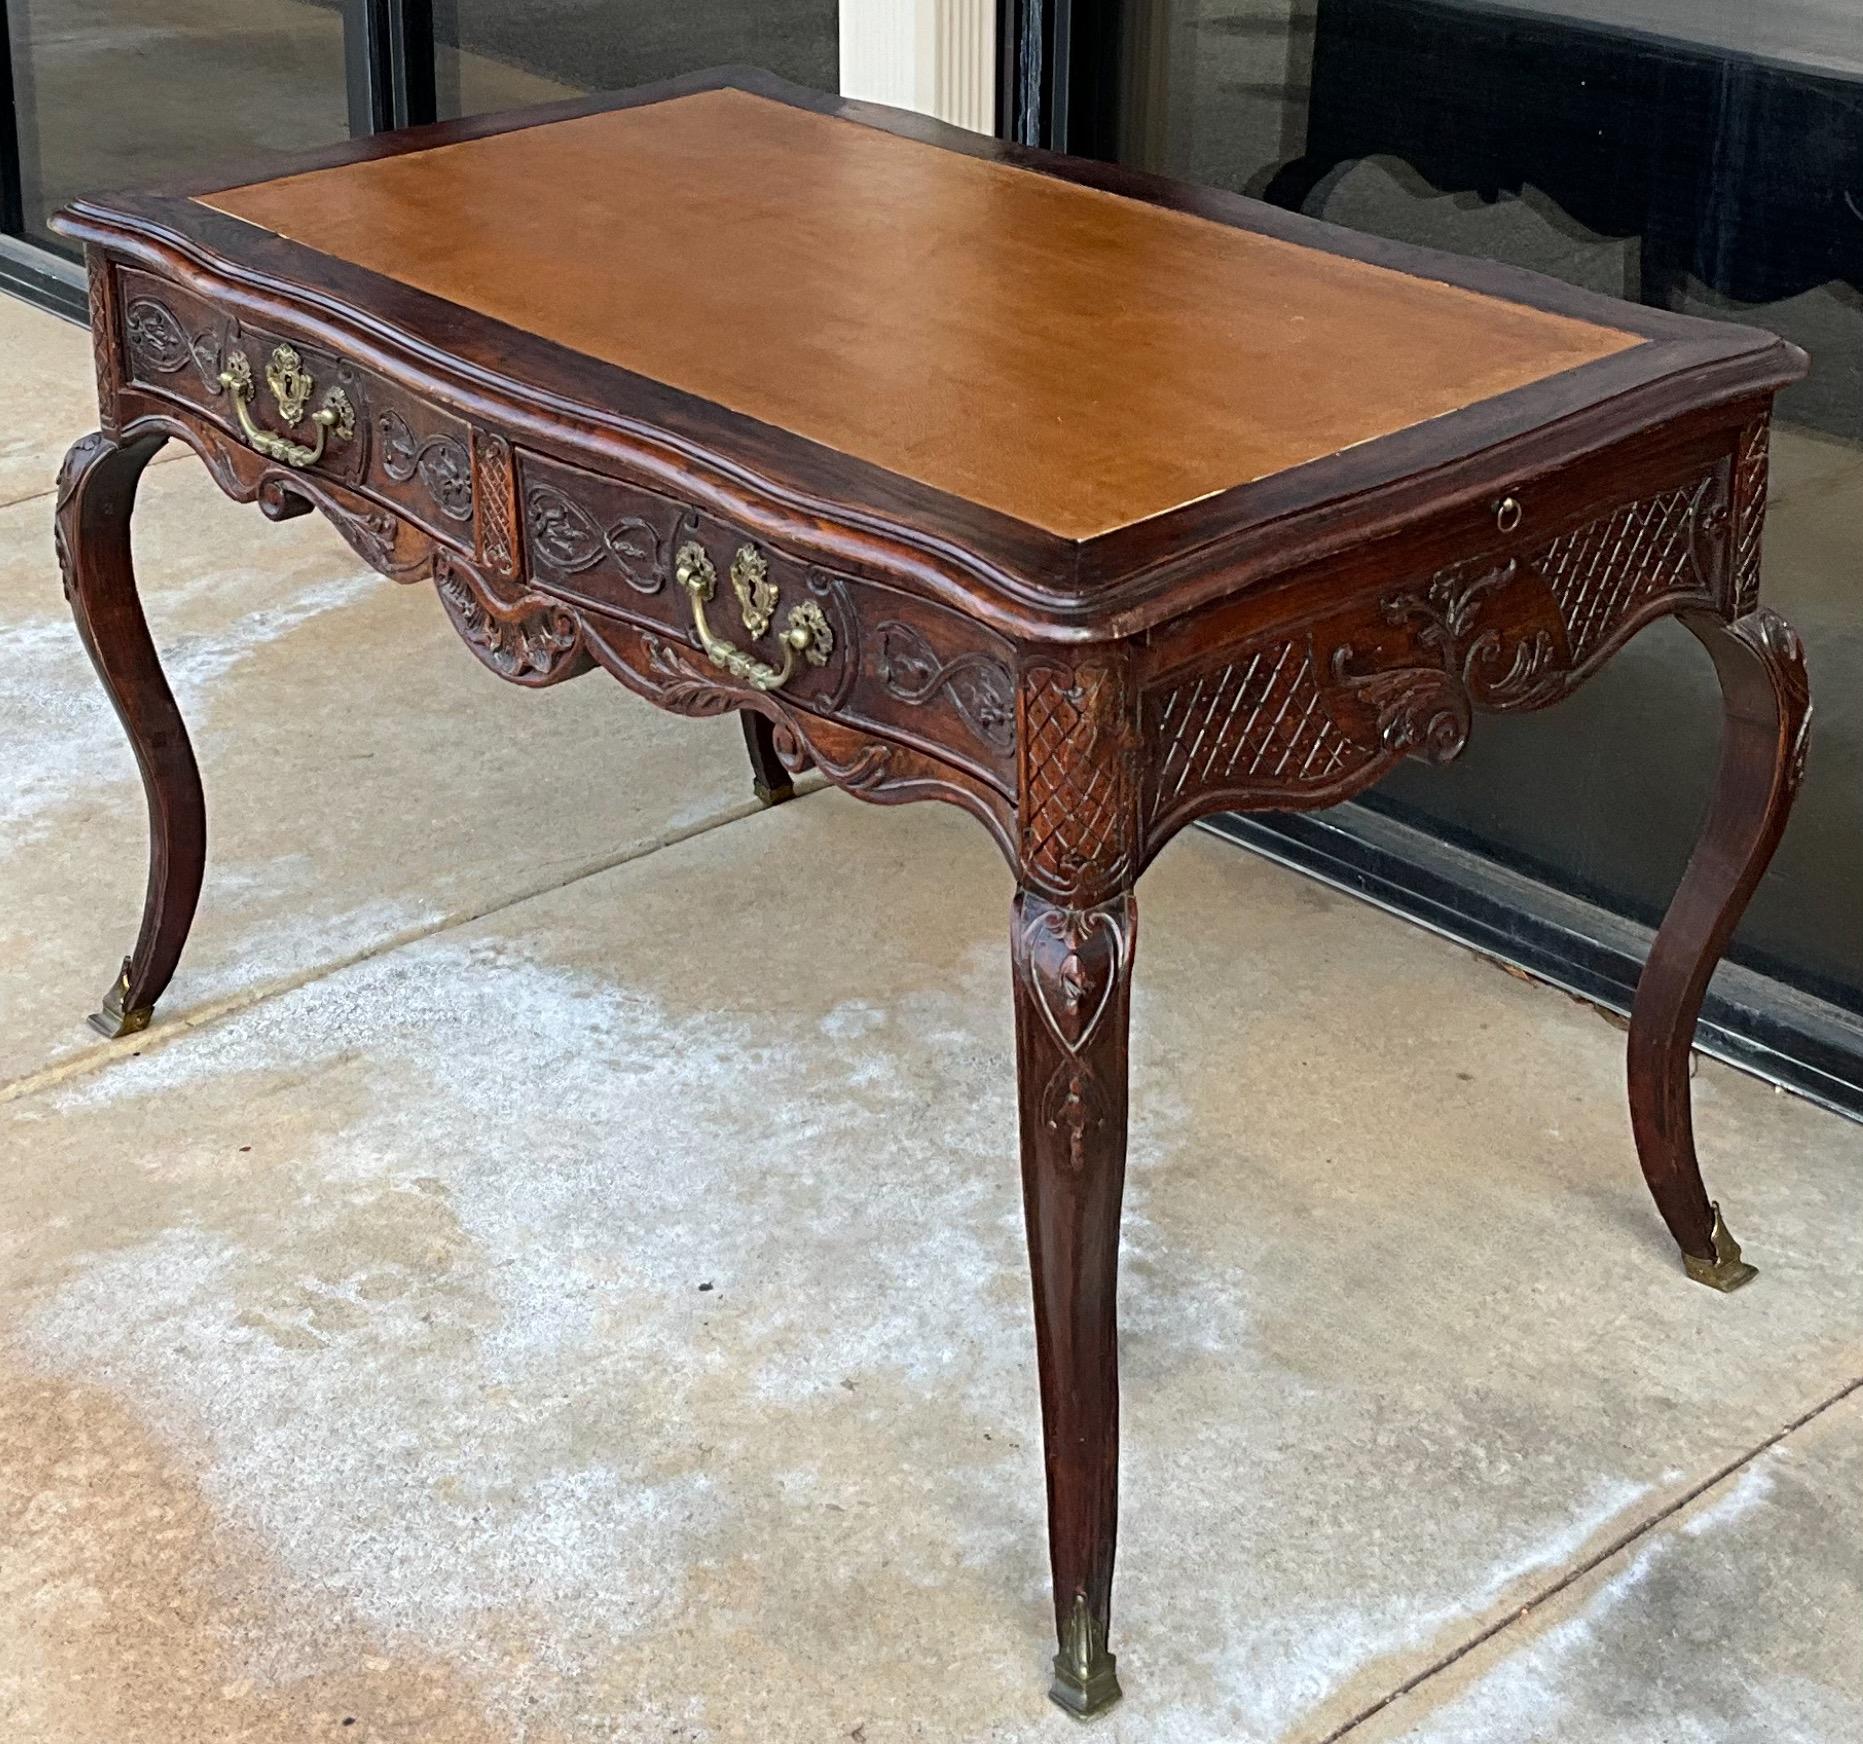 This is a special piece! It is a late 18th century carved oak and gilt bronze writing desk. It has two drawers and two identical faux drawers. Each foot is capped in bronze. The felt lined drawers have dovetail construction. The gold tooled leather